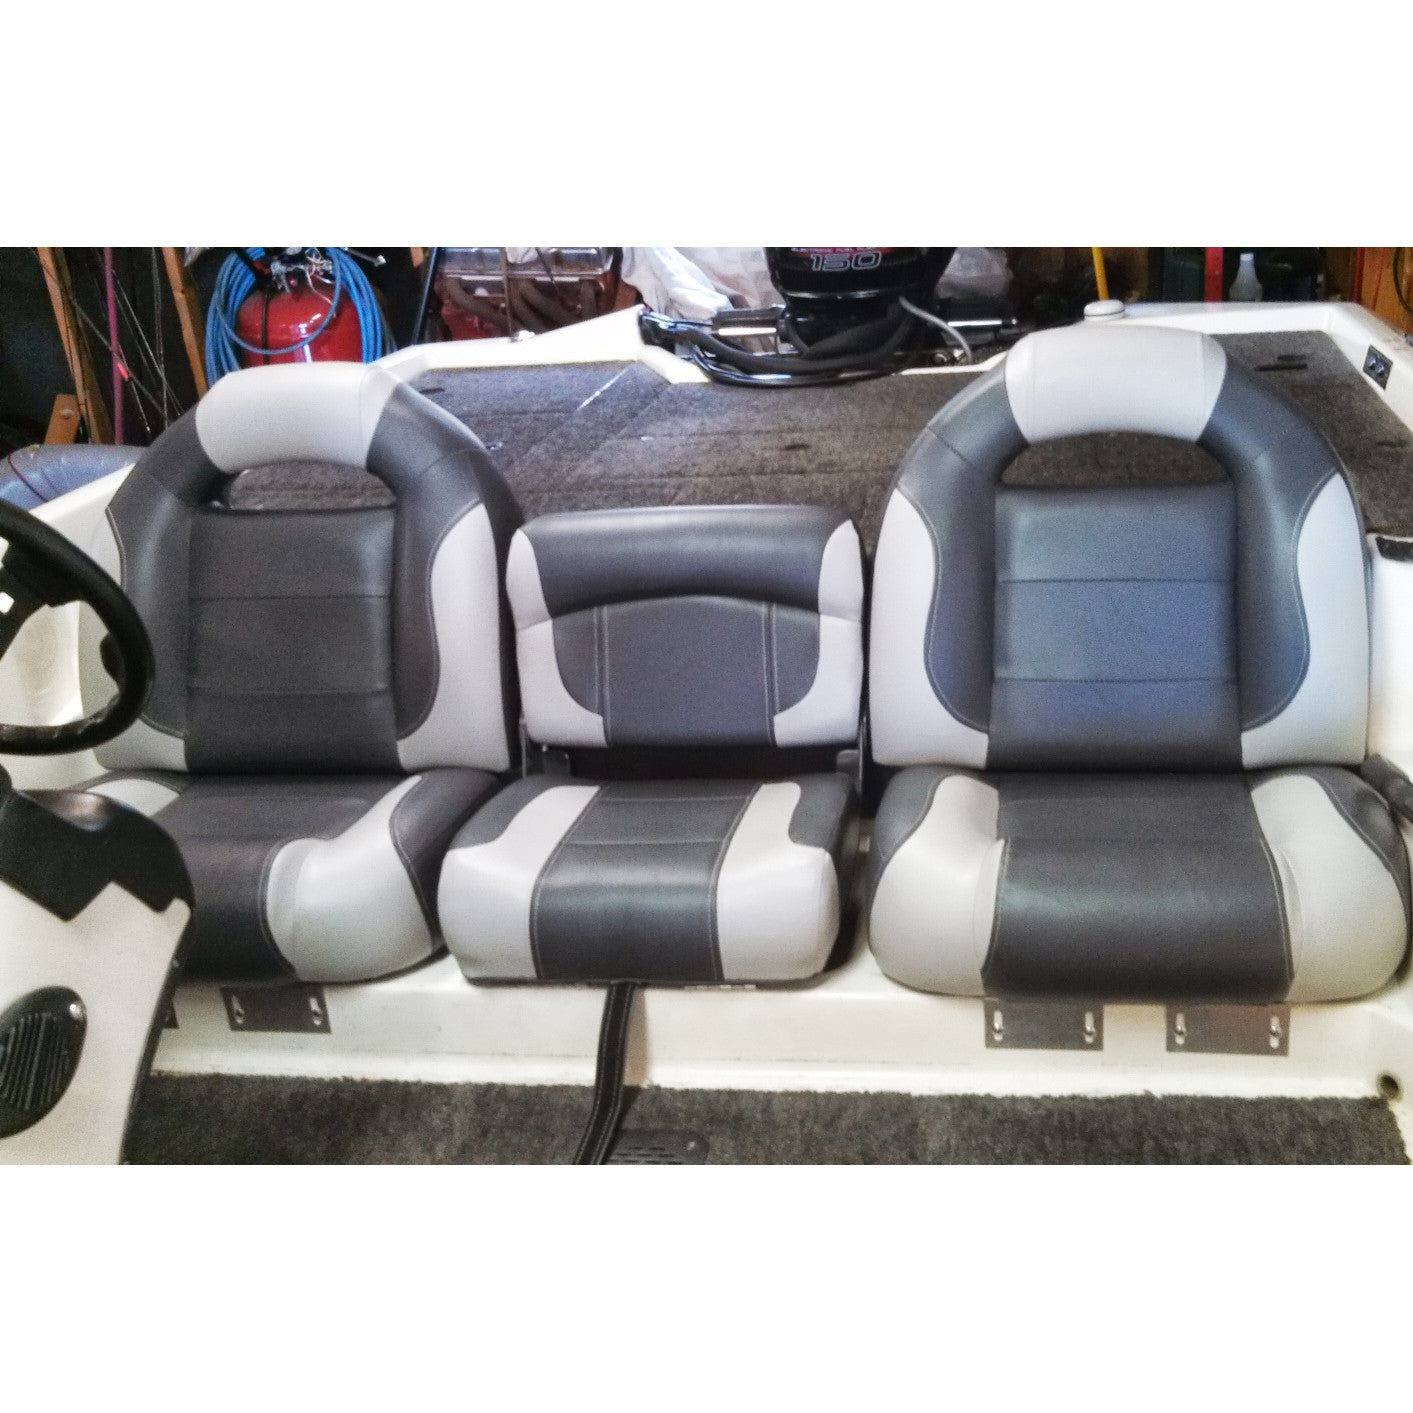 Bass Boat Seats  Complete Bass Boat Seat Interior Starting At $459.99